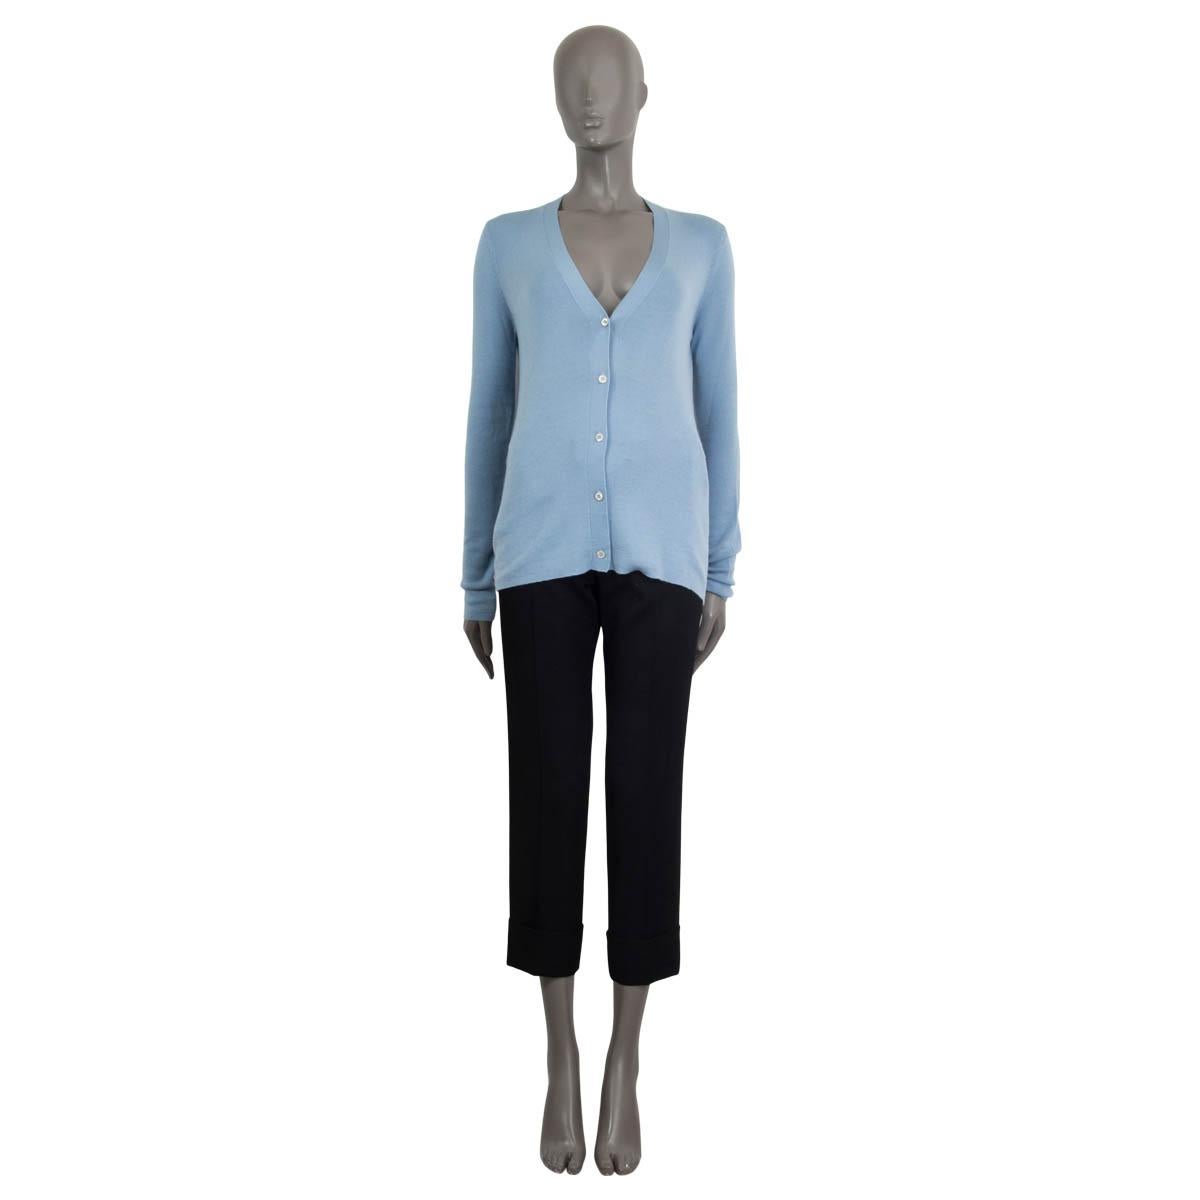 100% authentic Prada cardigan in light blue cashmere (70%) and silk (30%). Comes with a v-neck and opens with five plastic buttons on the front. Unlined. Has been worn and is in excellent condition. 

Matching sleeveless sweater available in